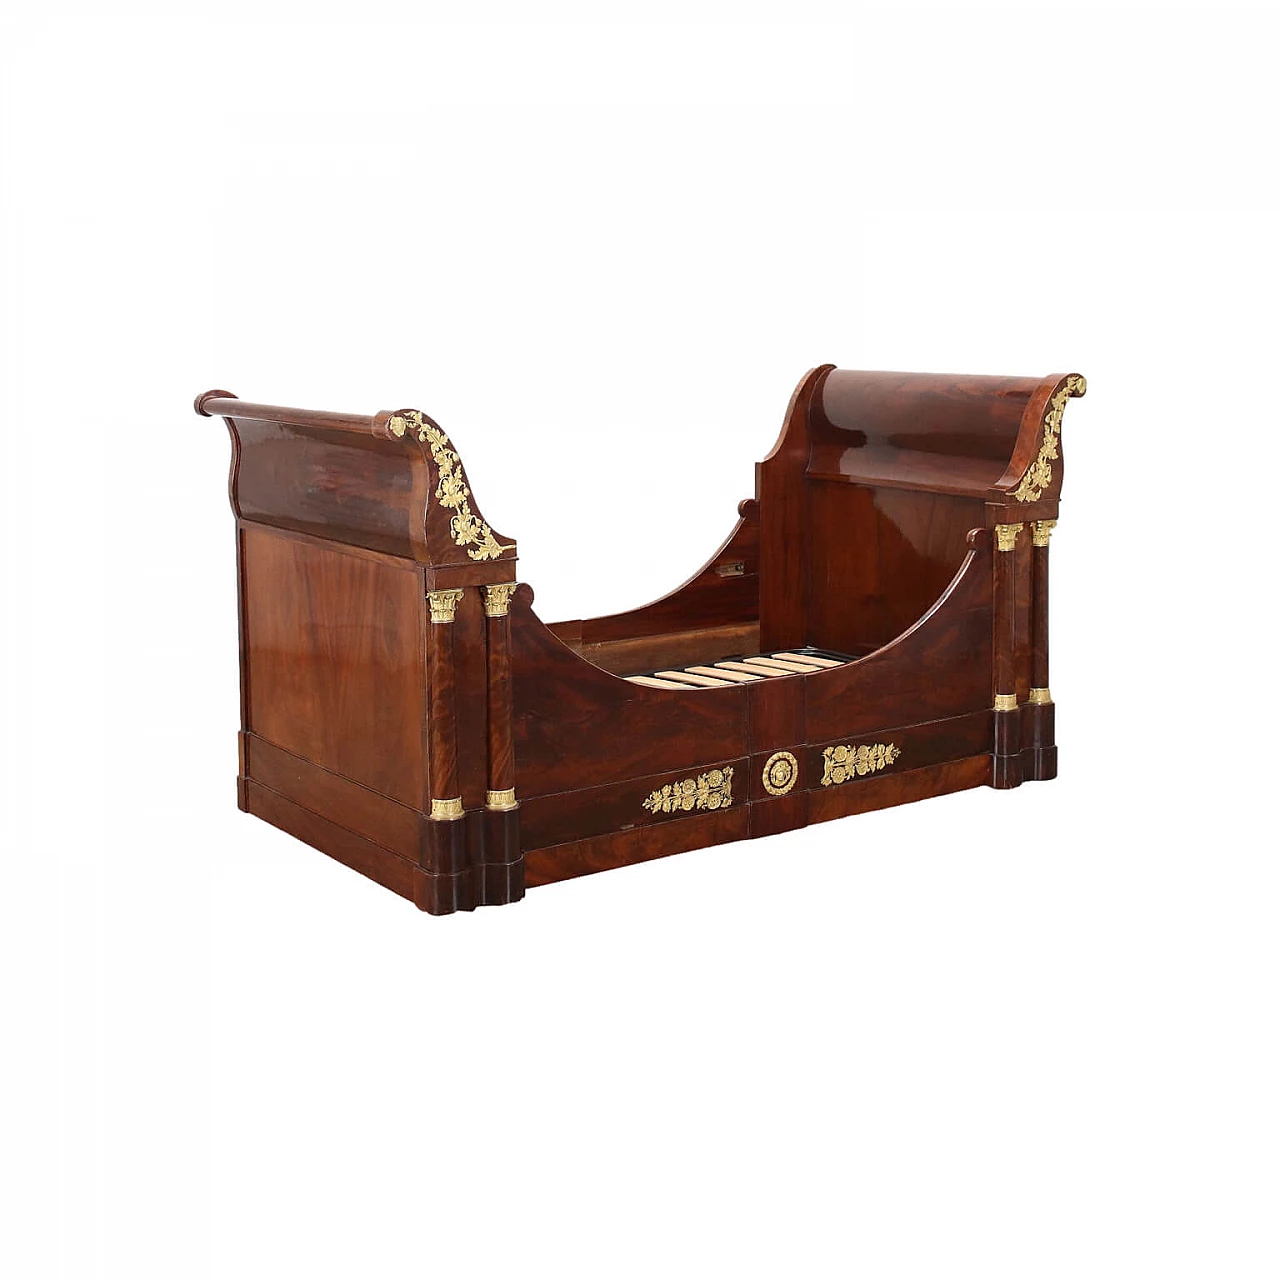 Empire style wooden boat bed with bronze applications, 19th century 1